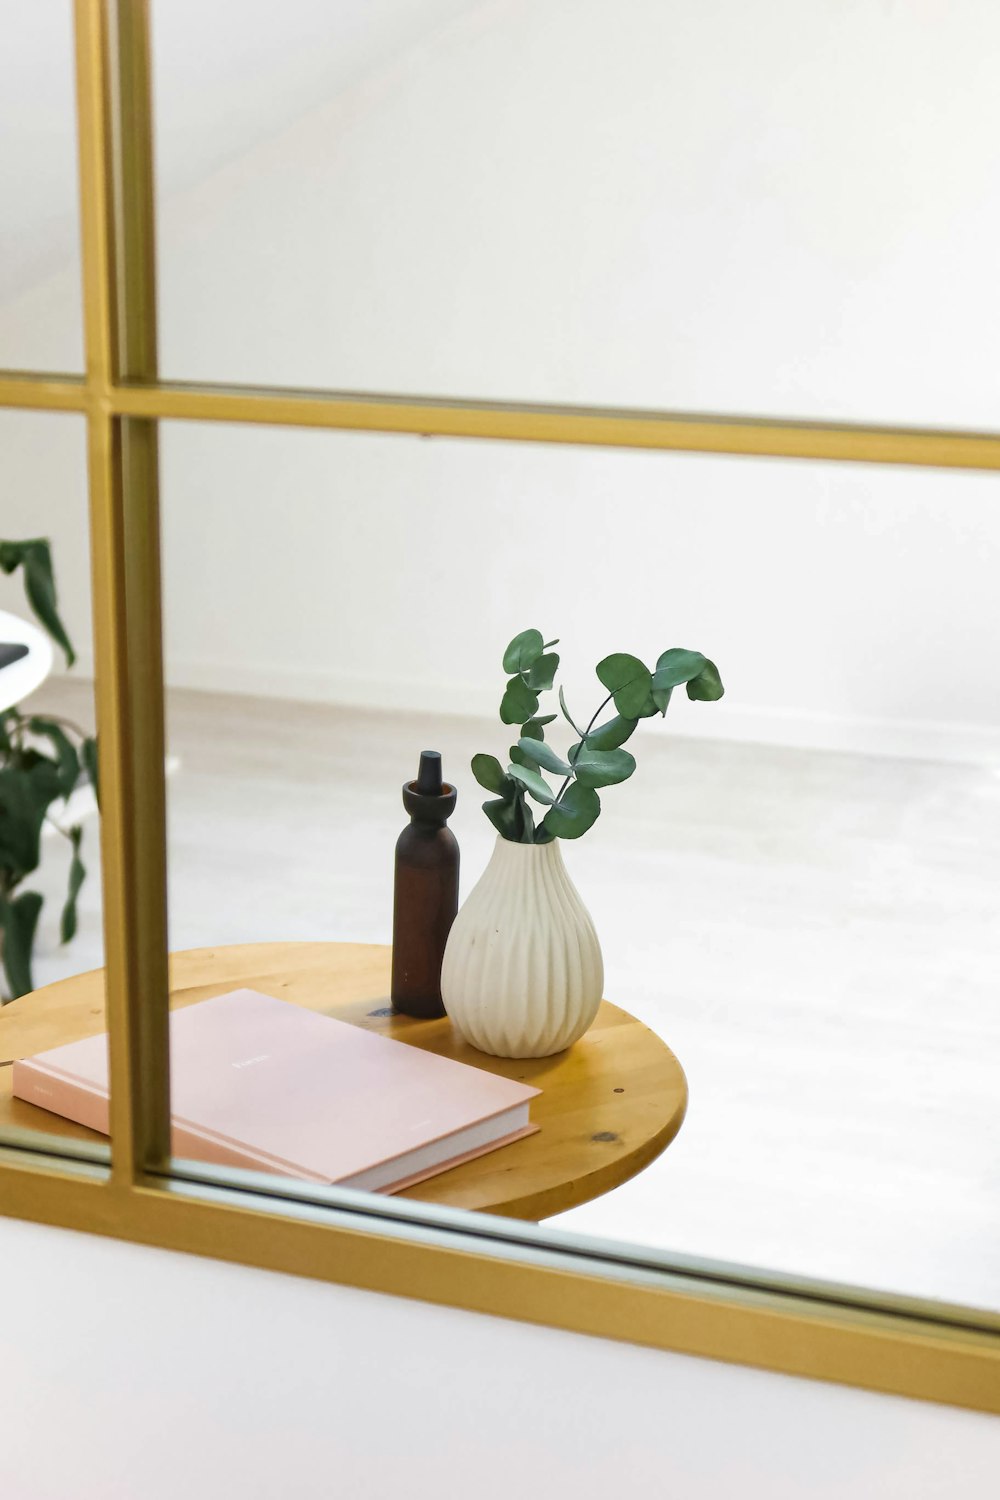 a table with a mirror and a vase with a plant on it